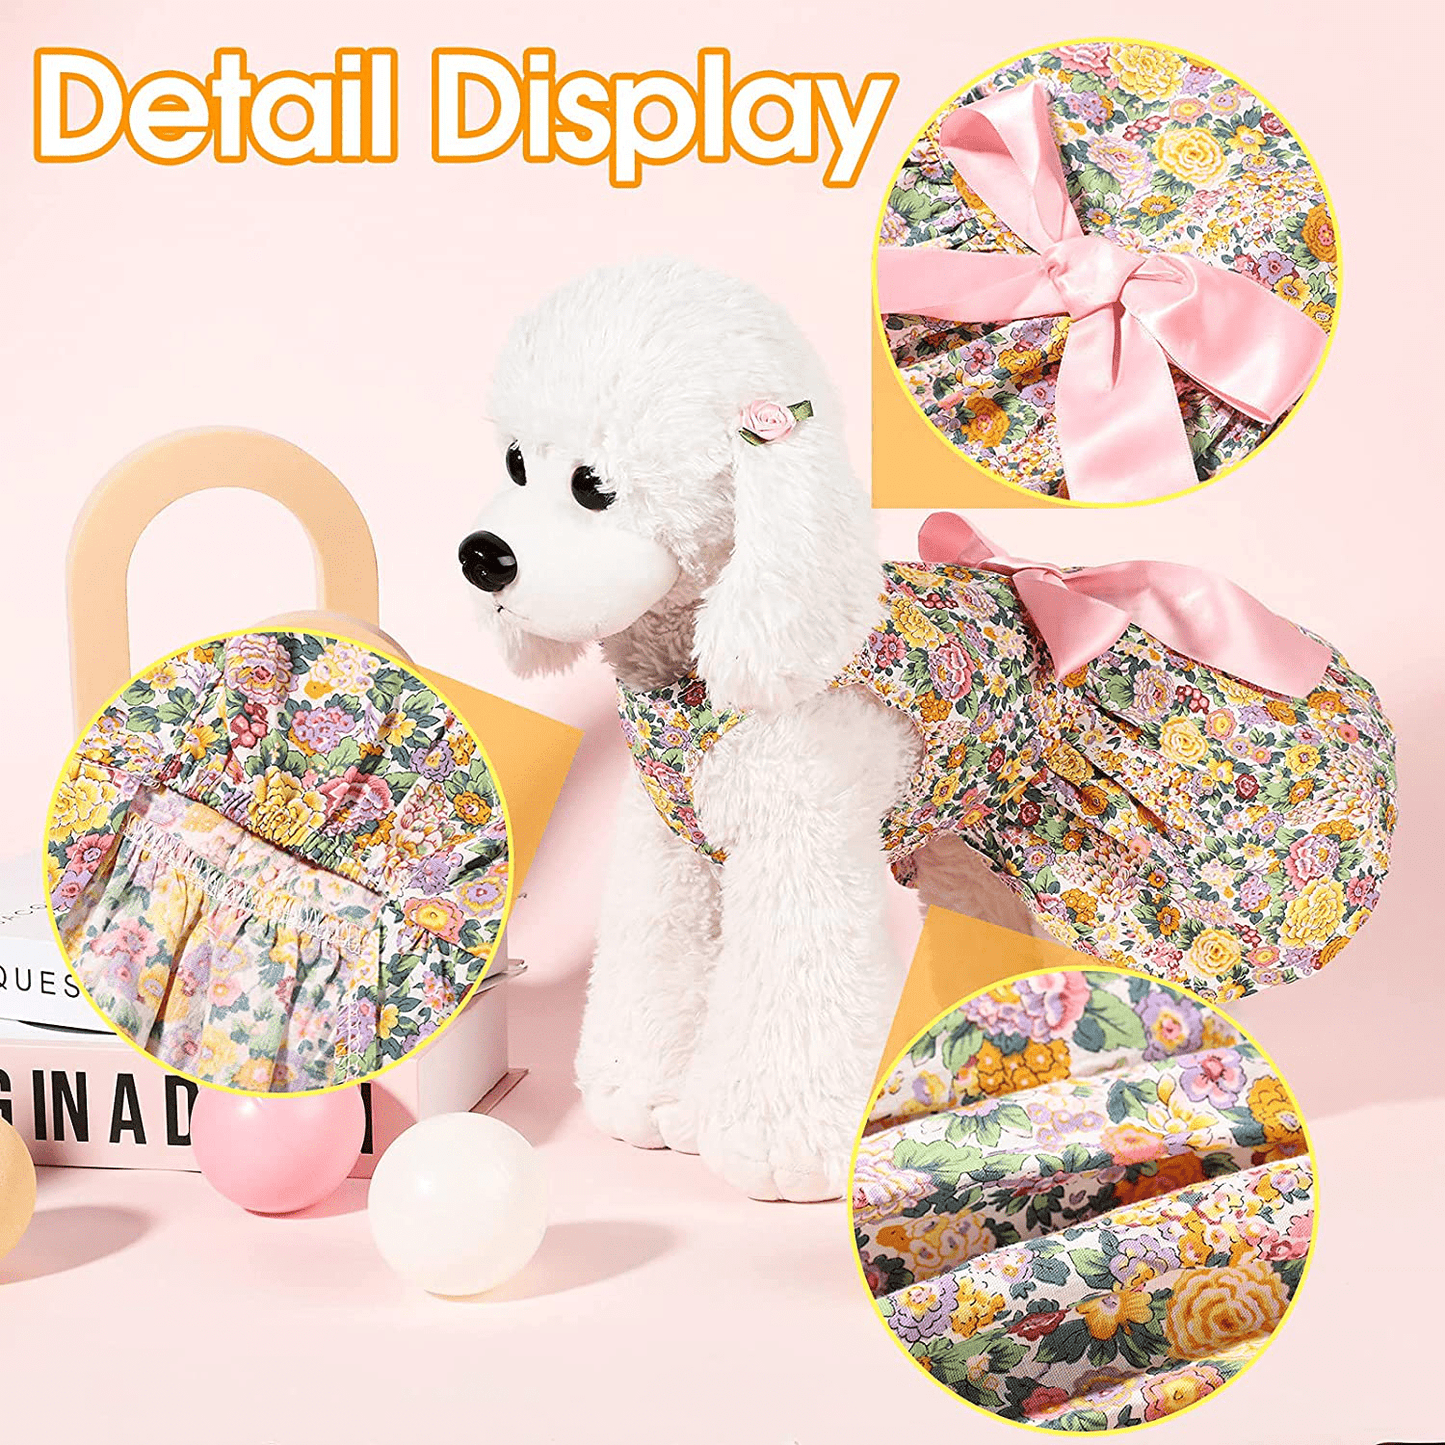 3 Pieces Cute Ribbon Dog Dress for Small Medium Dogs Flowers Pattern Bows Puppy Shirts Dog Clothes Pet Apparel or Dogs Cats in Wedding Holiday Christmas New Year Summer (Multiple Flowers,Medium)